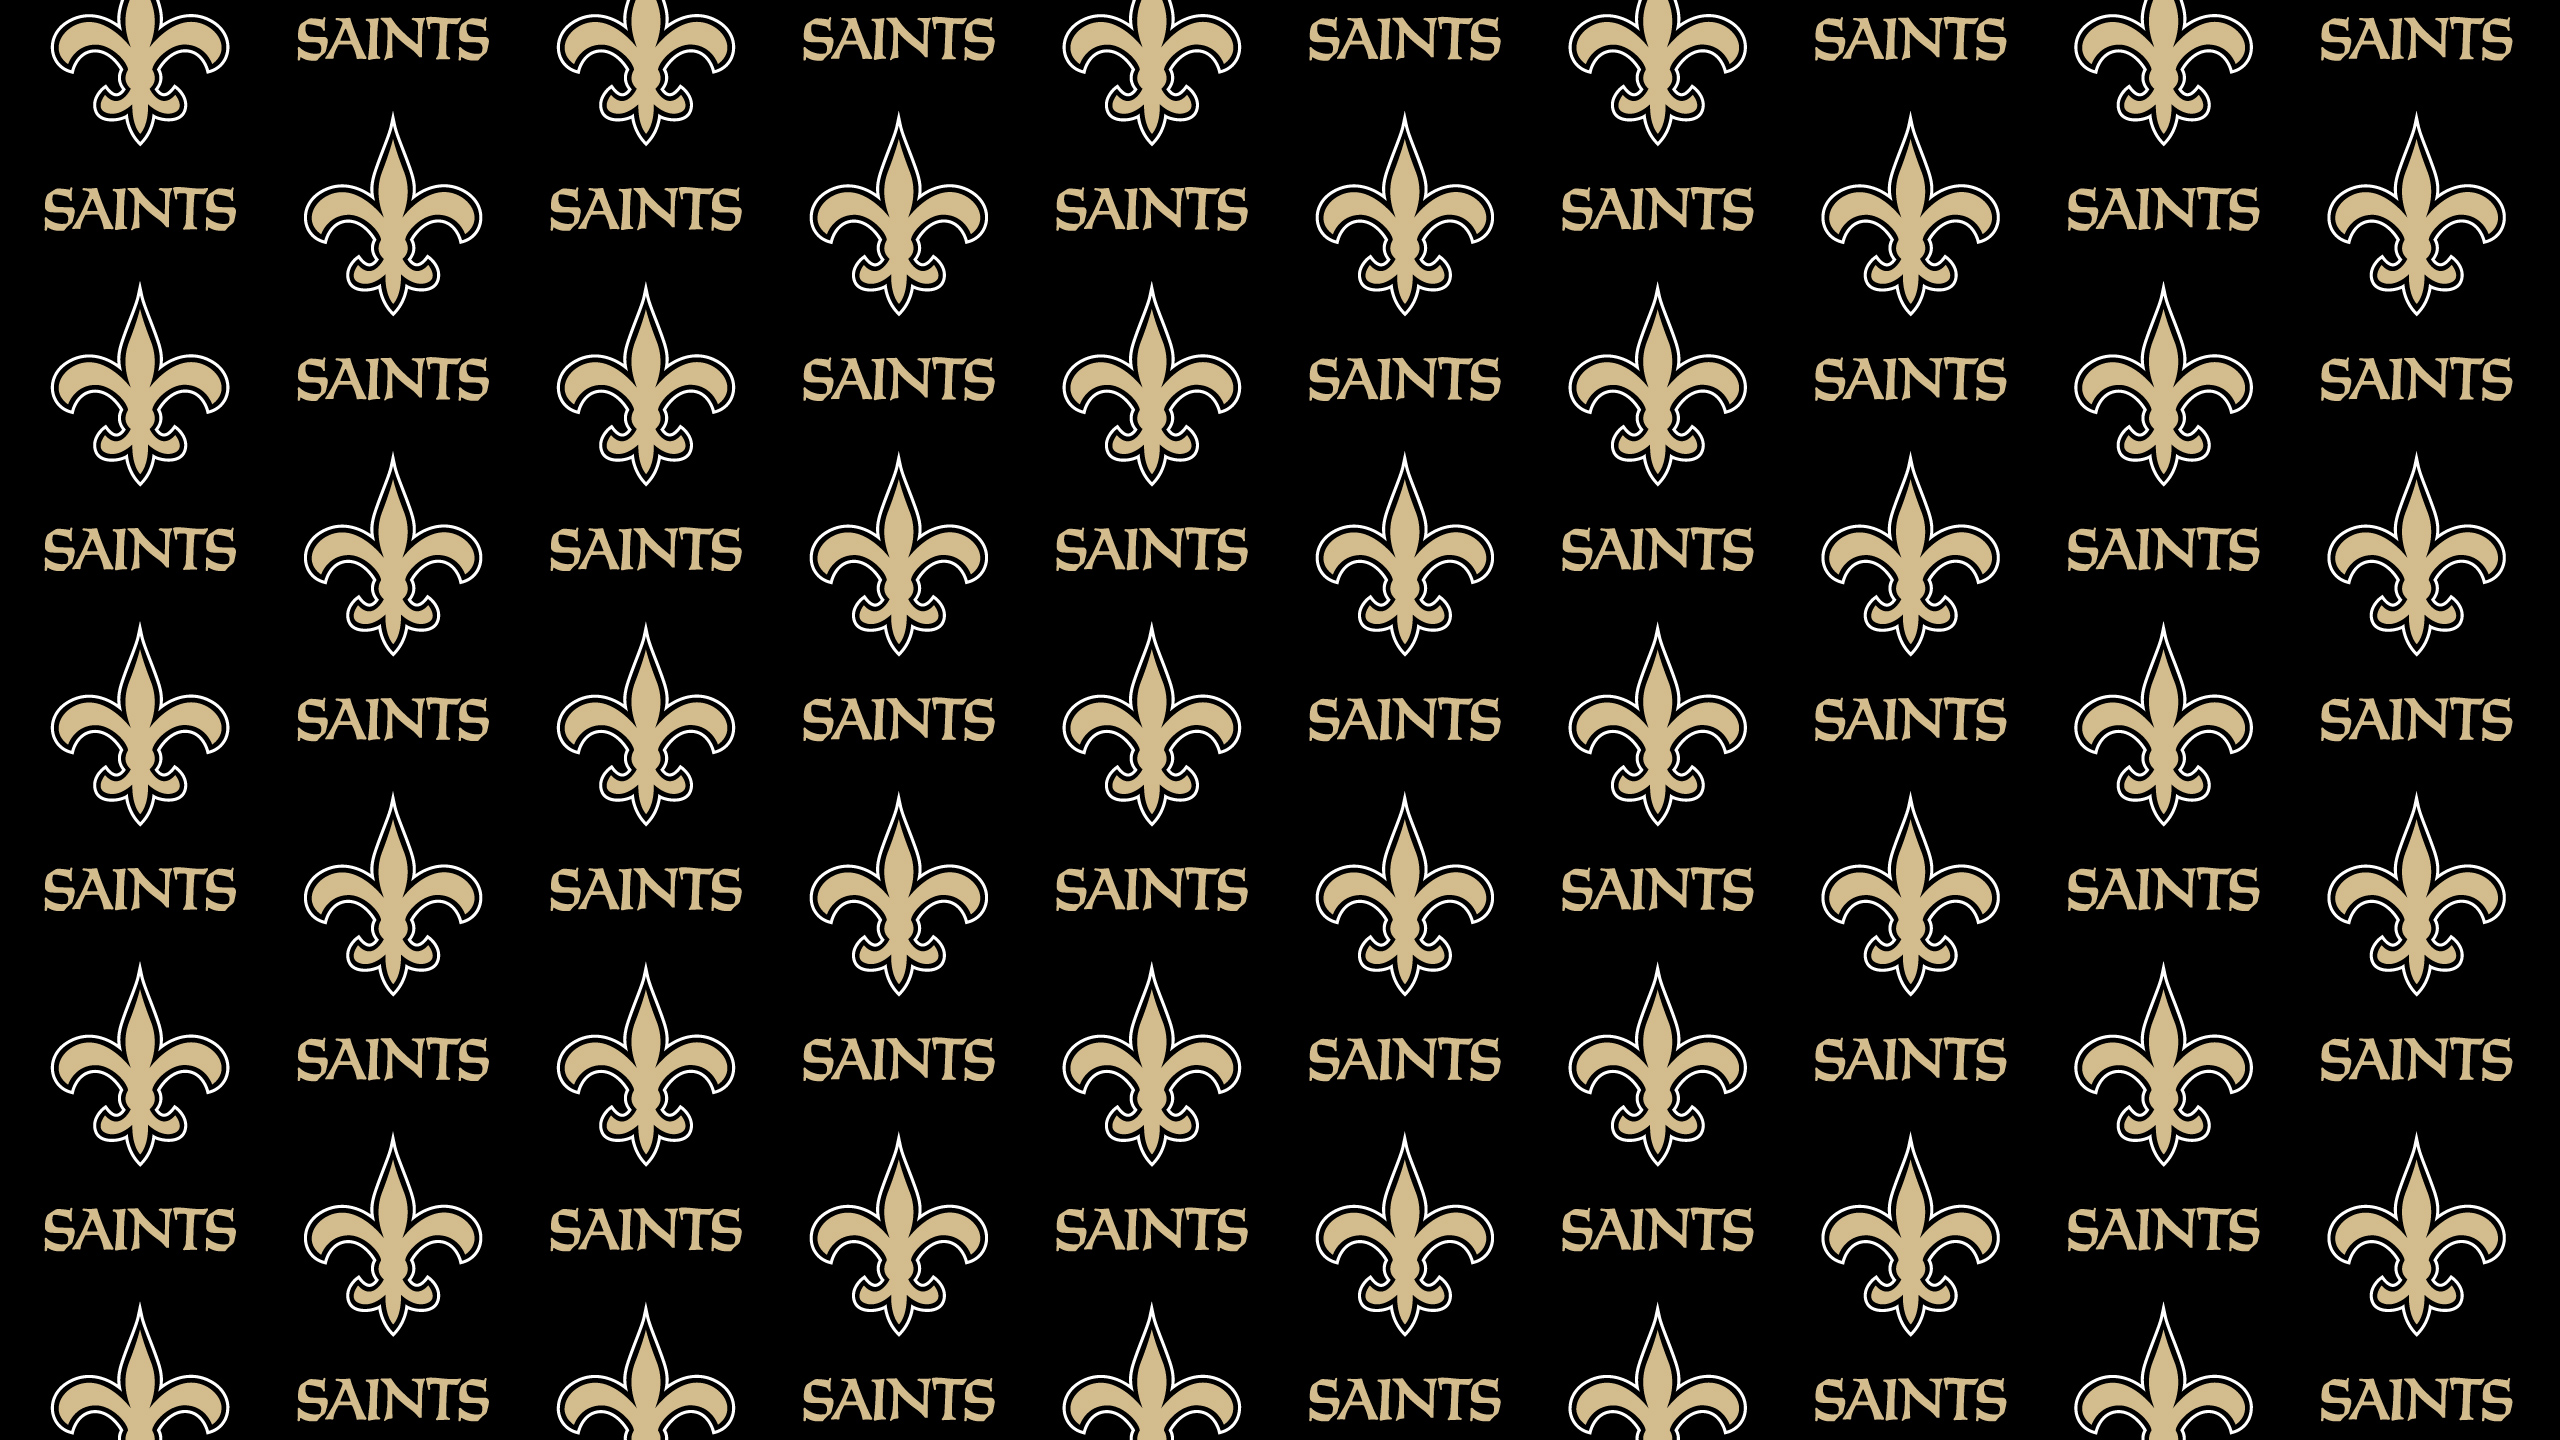 video conference background for Saints fans working remotely